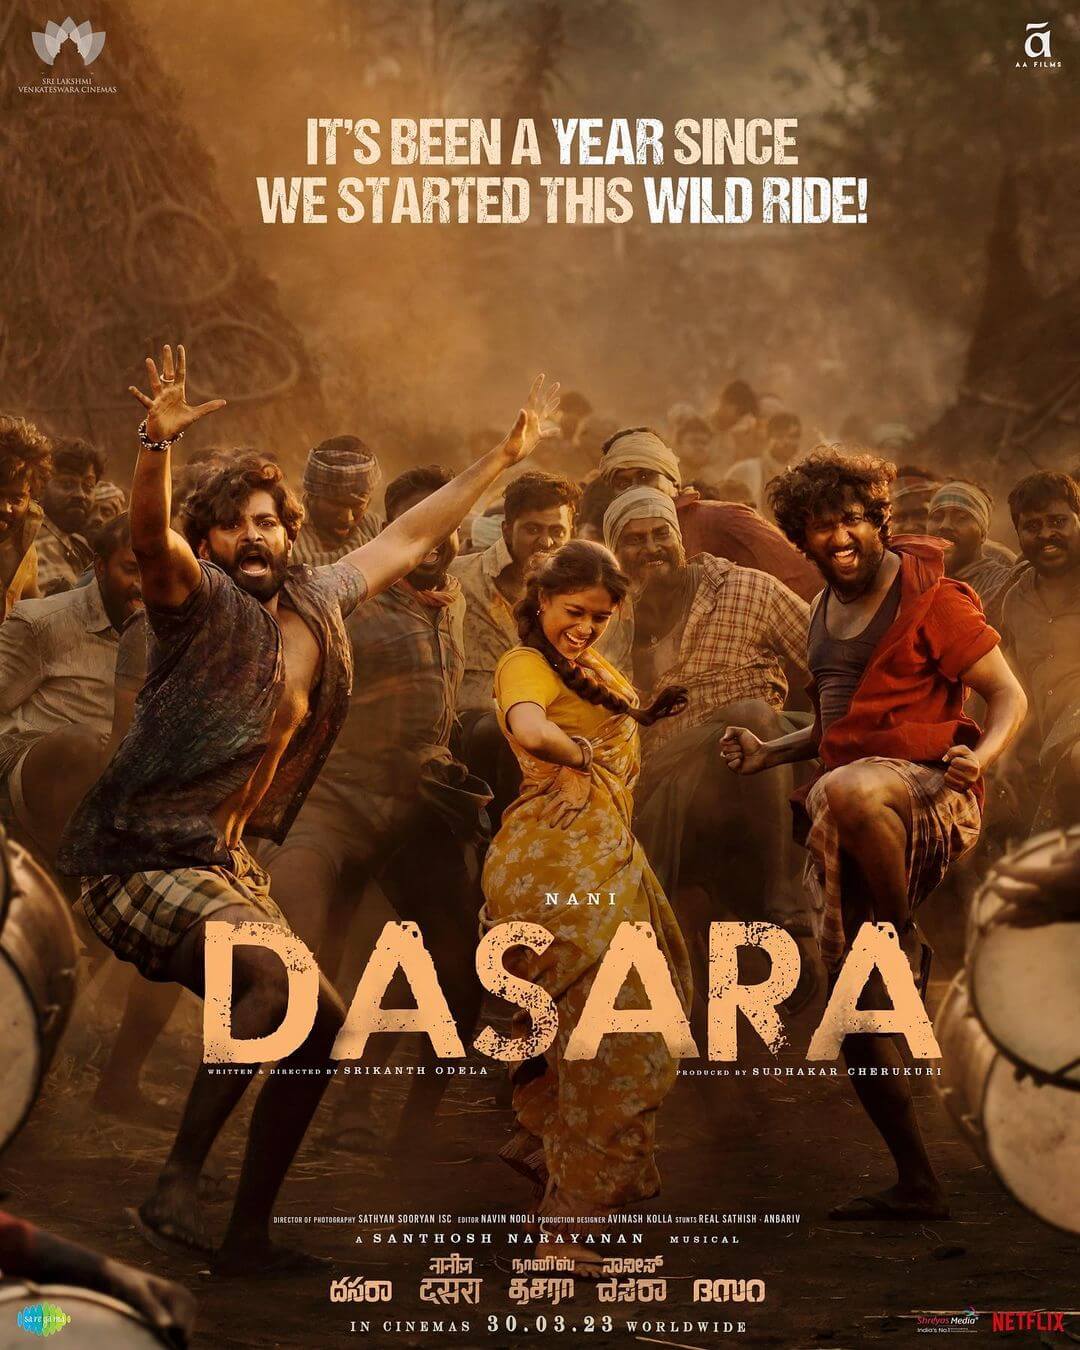 Dasara Movie (2023) Cast, Release Date, Story, Budget, Collection, Poster, Trailer, Review